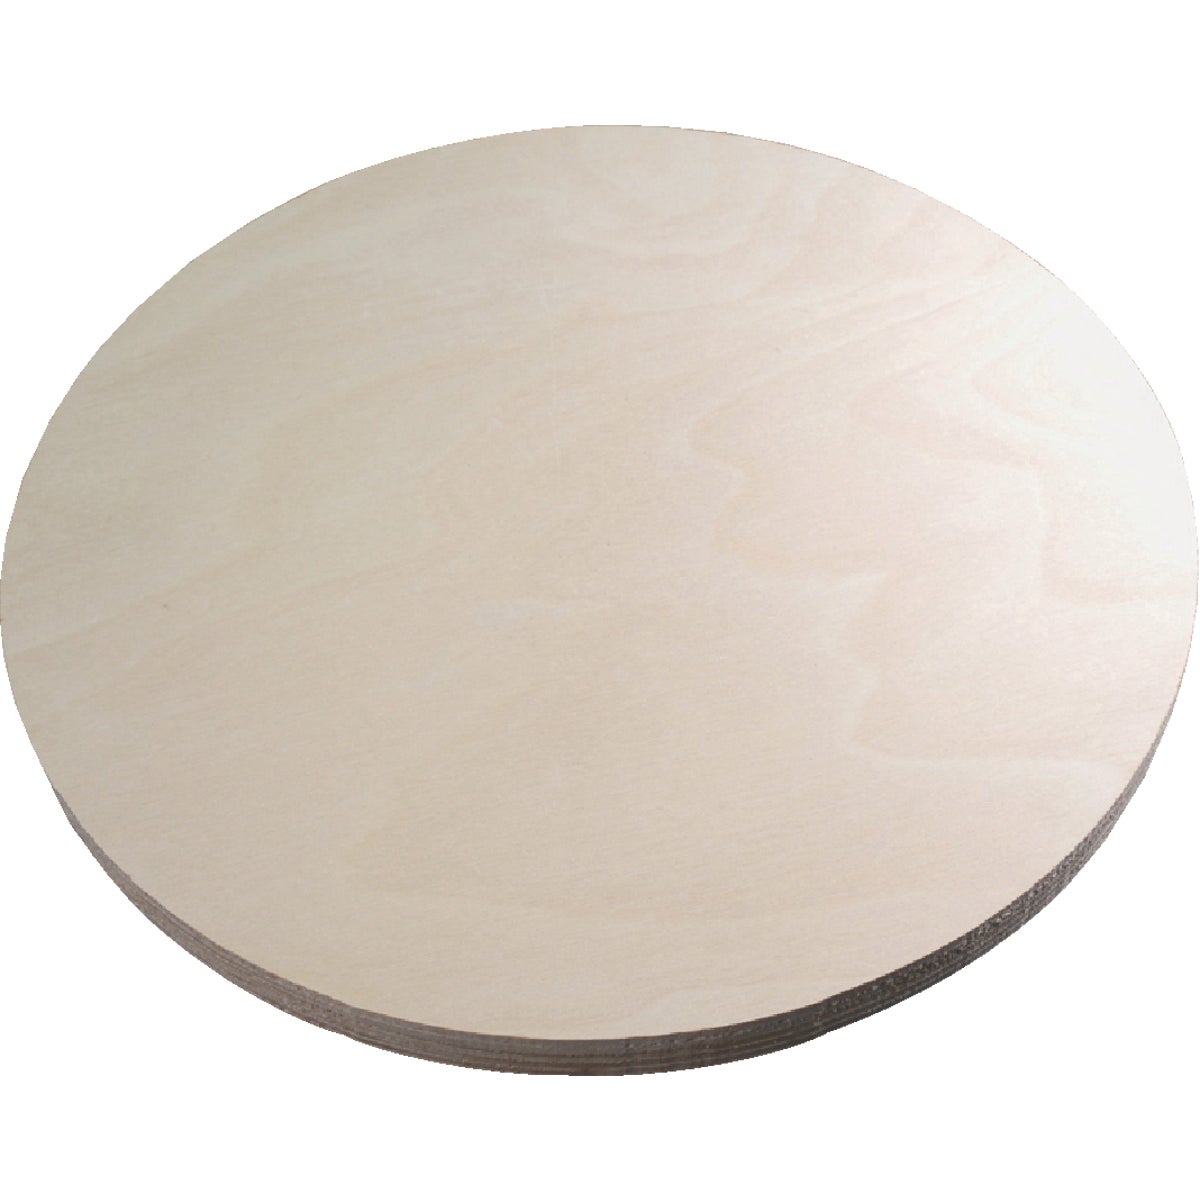 Alexandria Moulding 3/4 In. x 12 In. Plywood Round